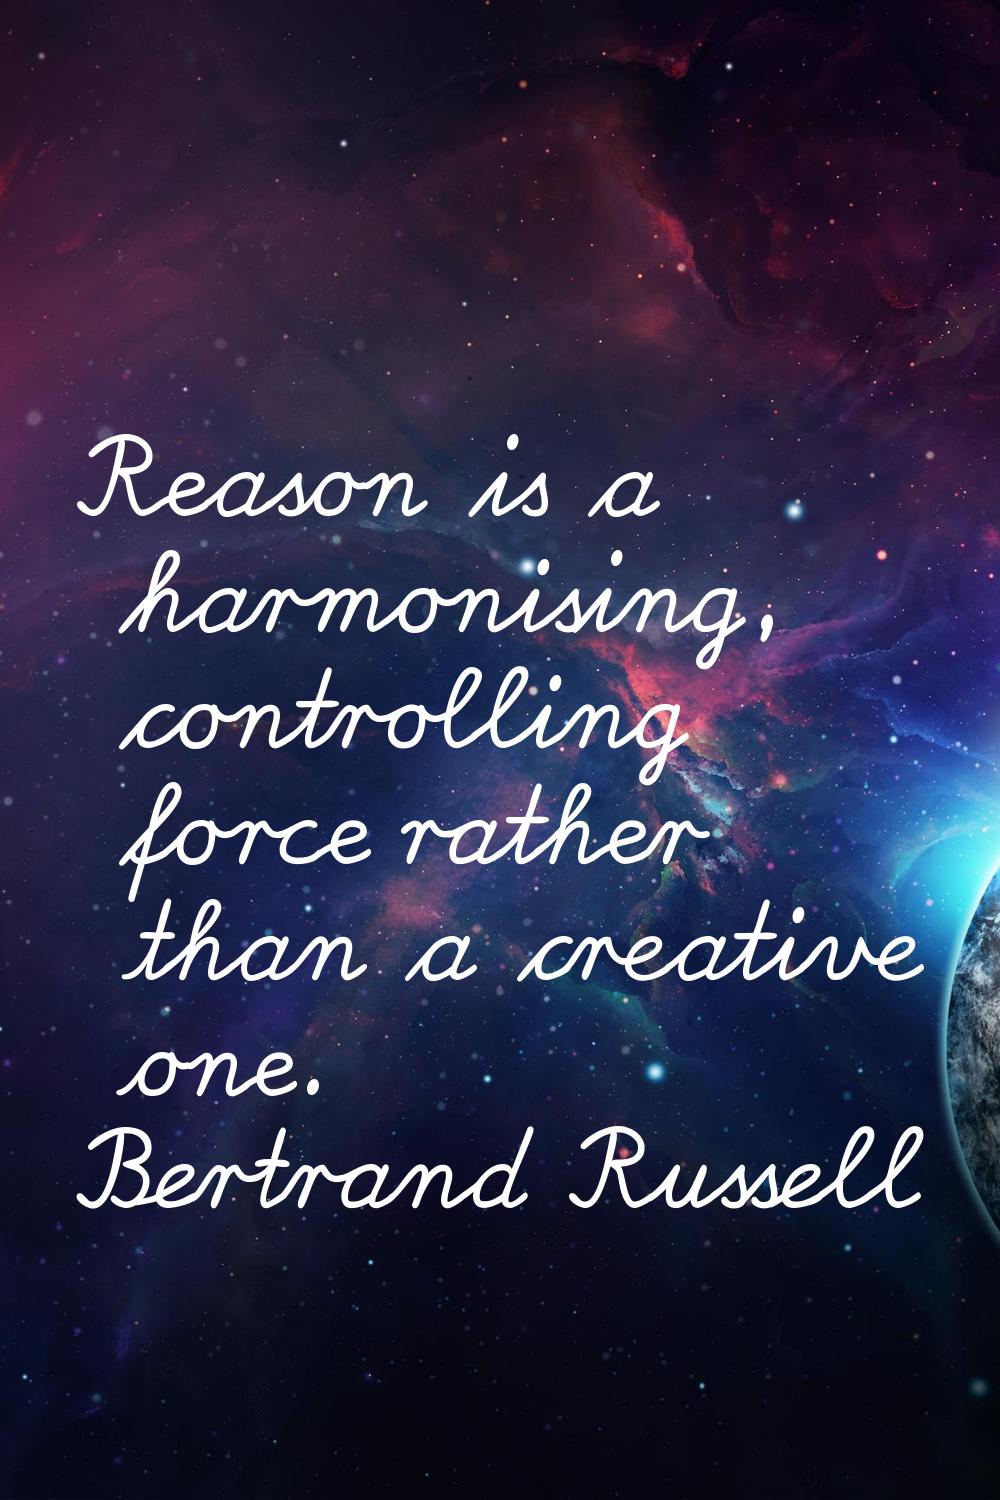 Reason is a harmonising, controlling force rather than a creative one.